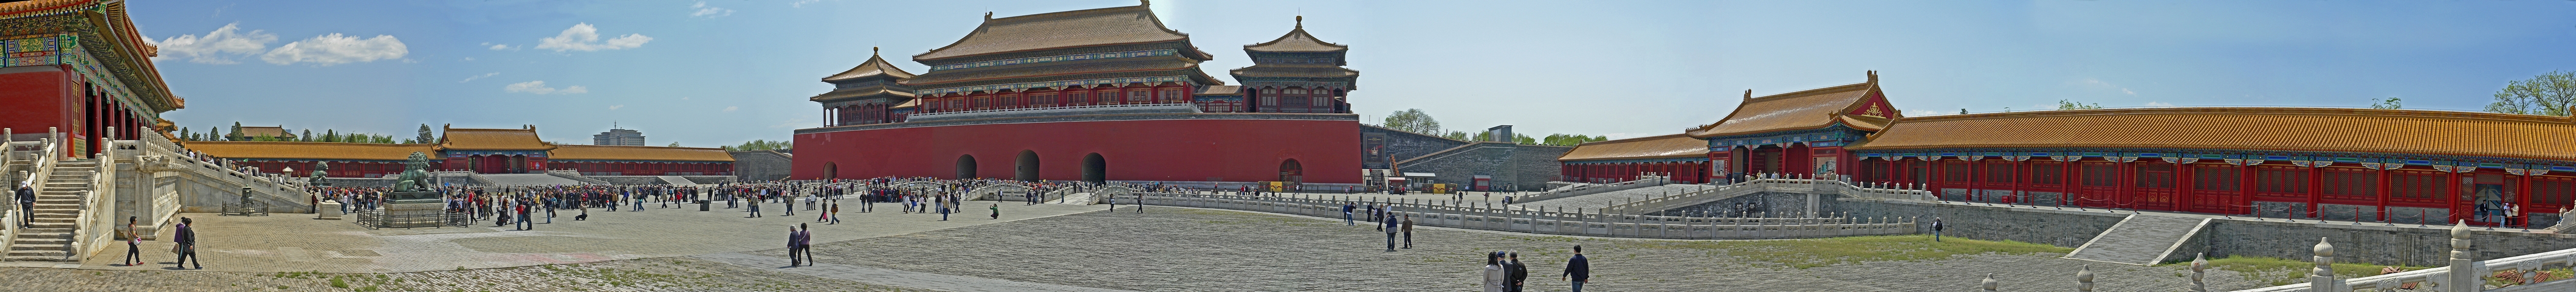 Beijing11.jpg - 8 images, Size: 21531 x 2438, FOV: 213.11 x 23.62, RMS: 2.52, Lens: Standard, Projection: Cylindrical, Color: LDR